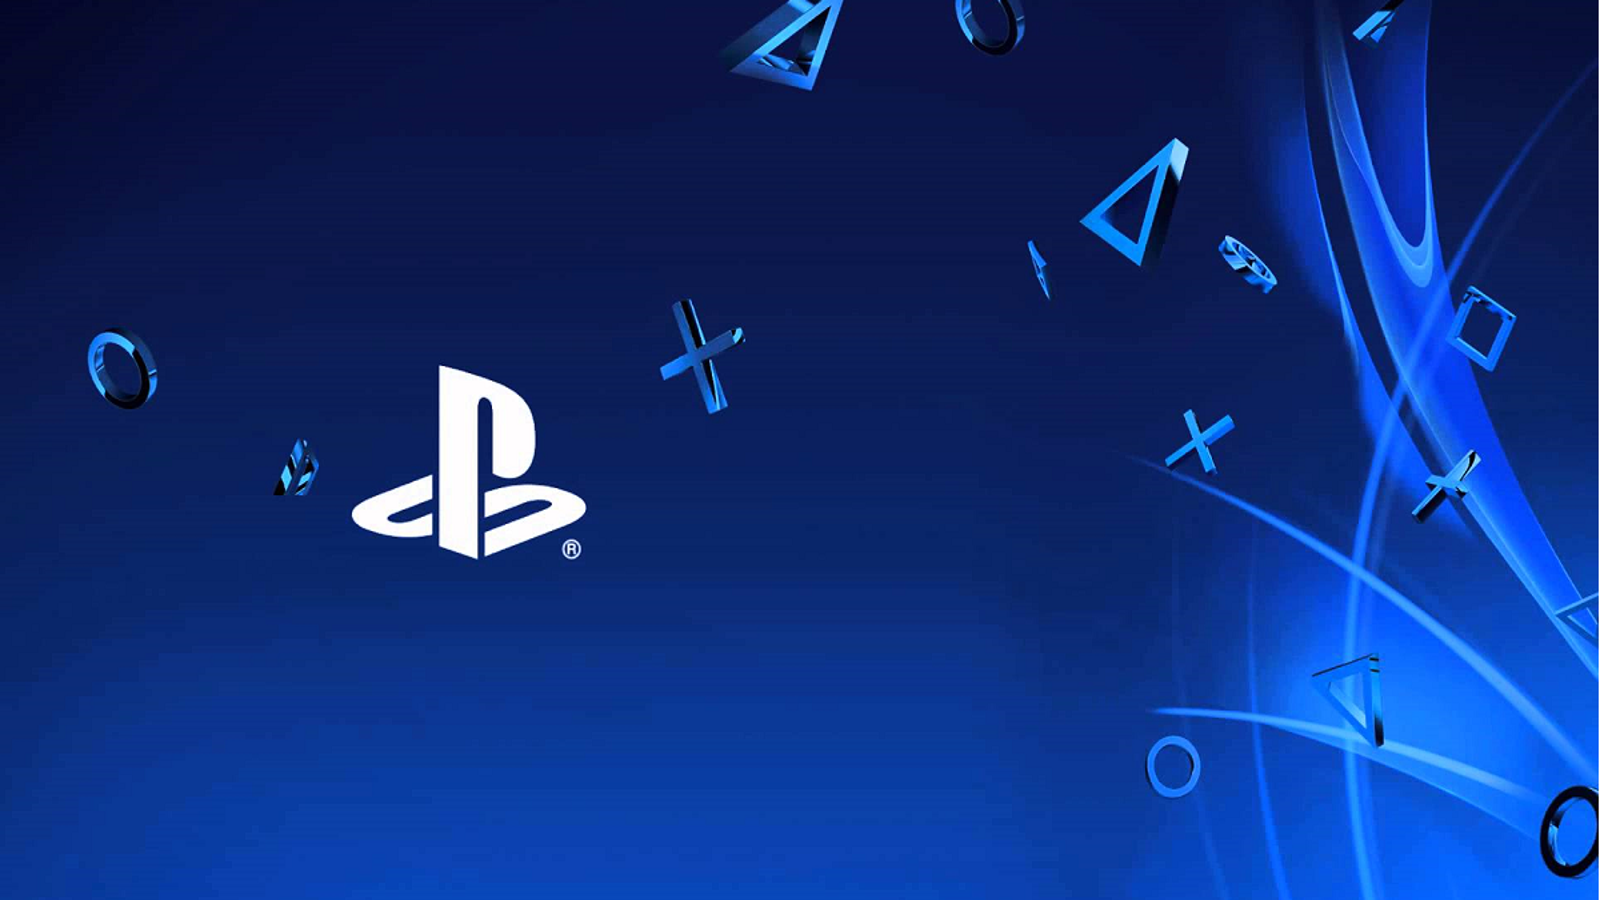 PlayStation Direct store launches in Germany